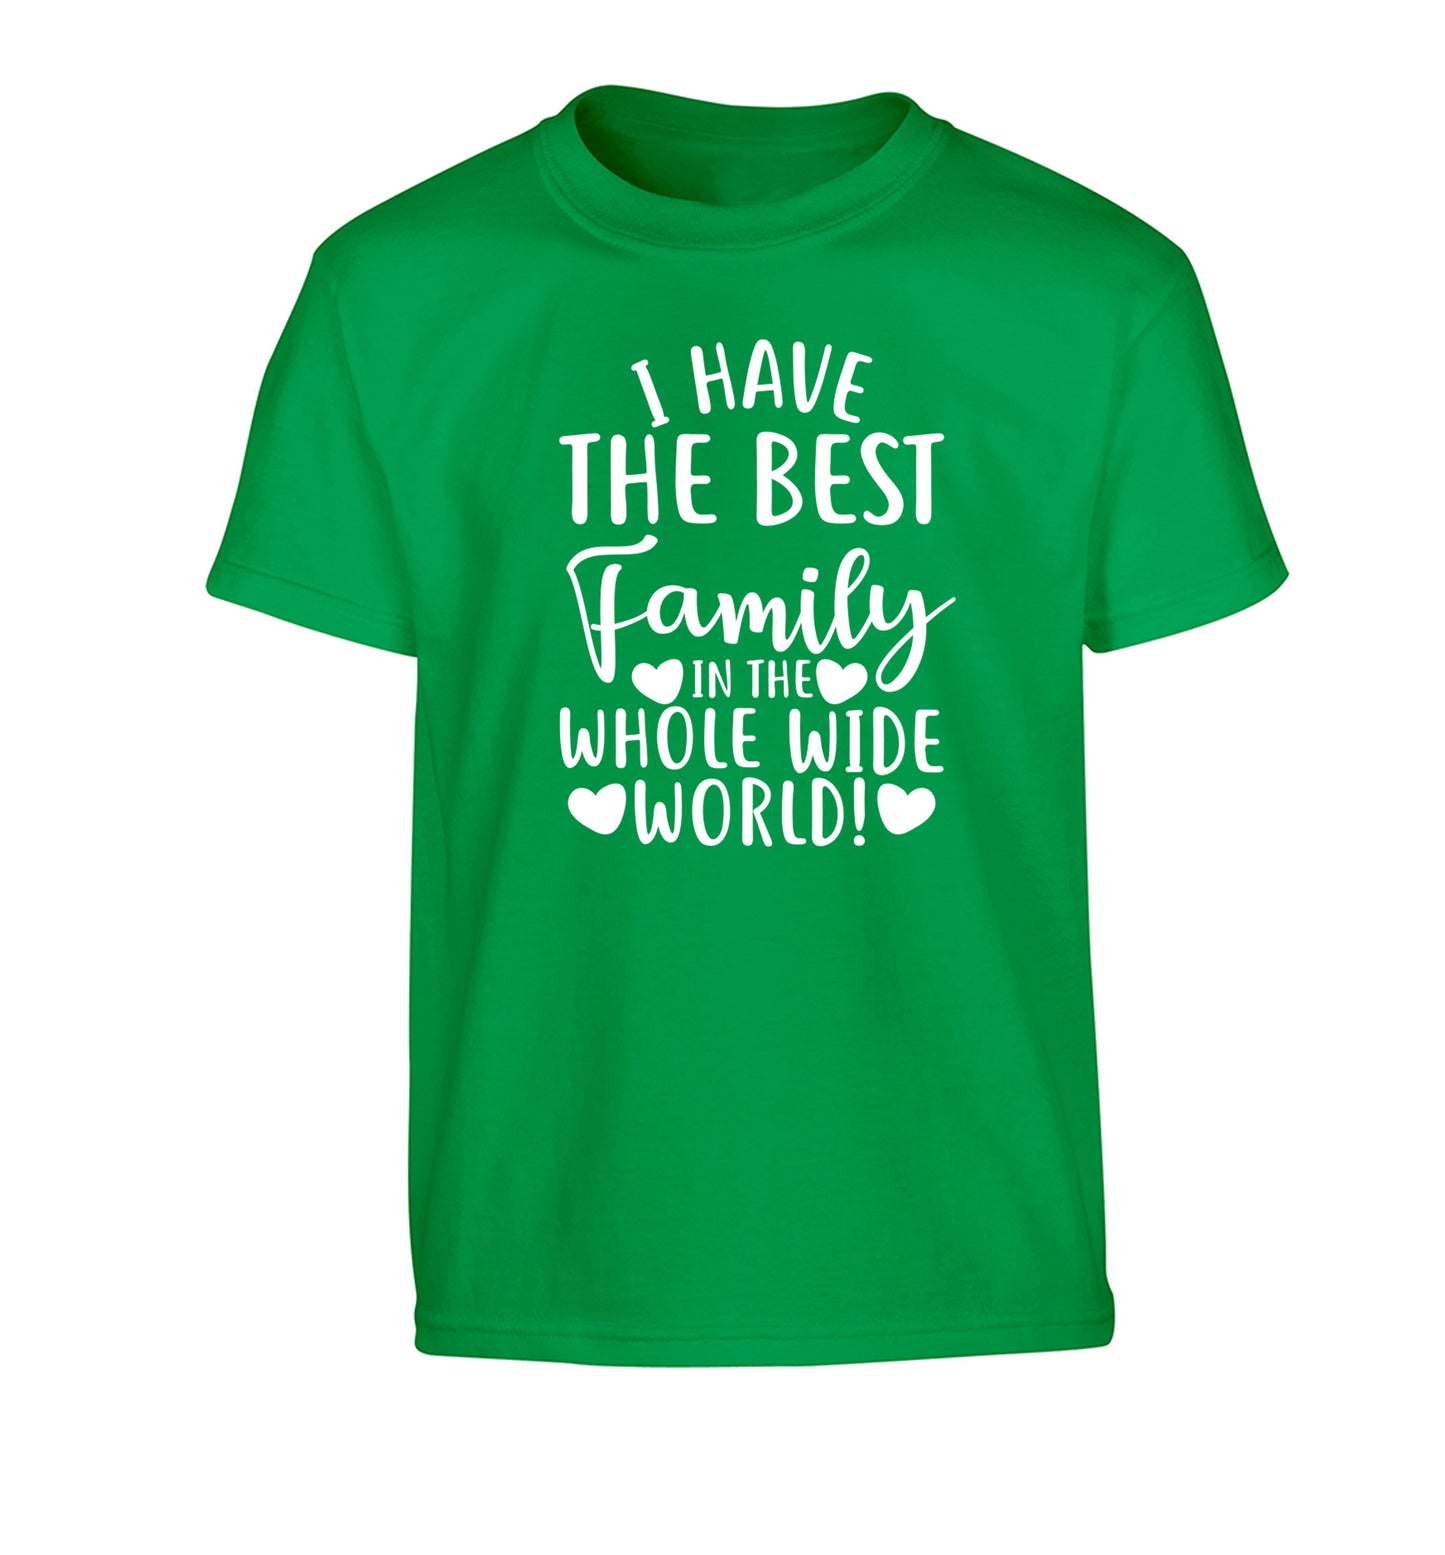 I have the best family in the whole wide world! Children's green Tshirt 12-13 Years